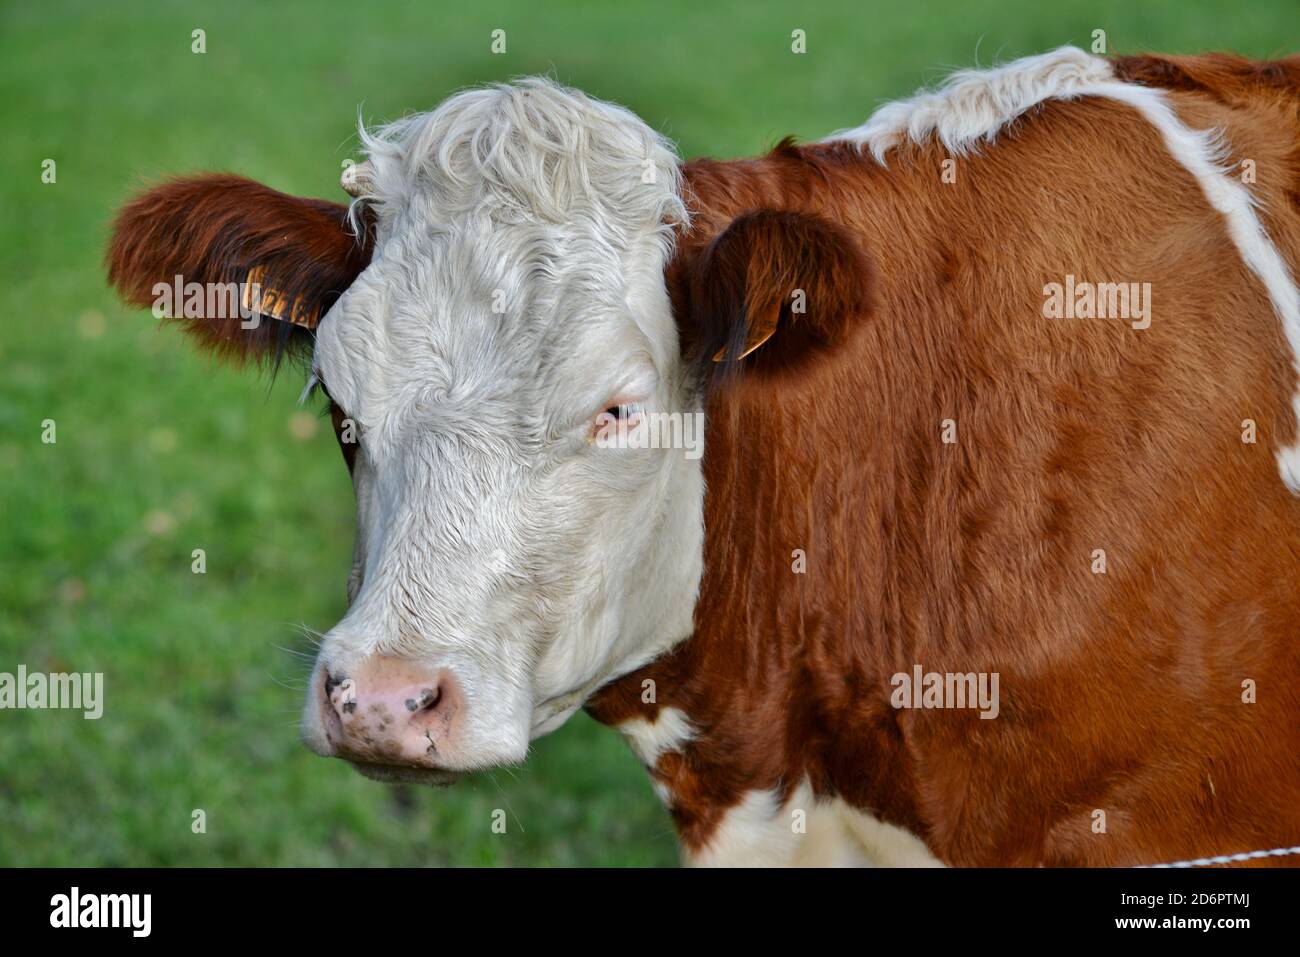 cow of the breed spotted cattle Stock Photo